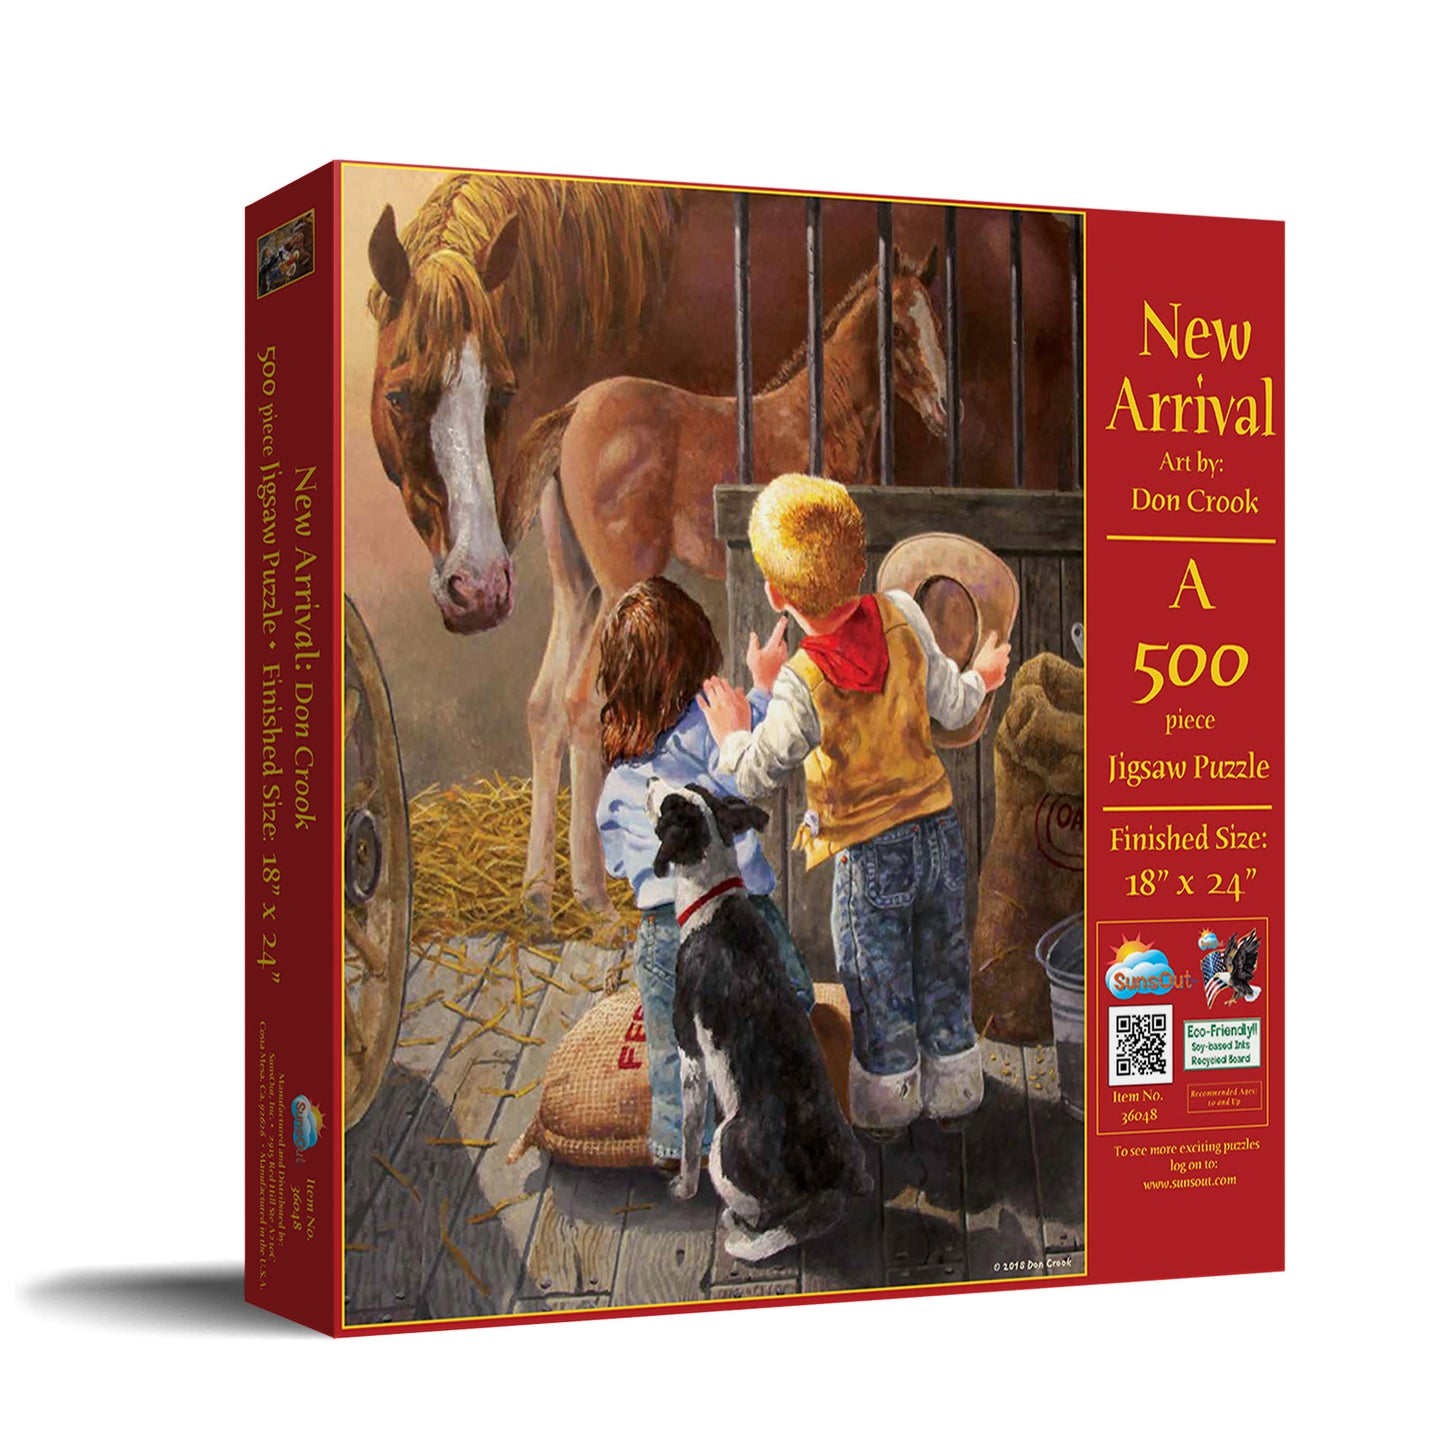 New Arrival - 500 Piece Jigsaw Puzzle